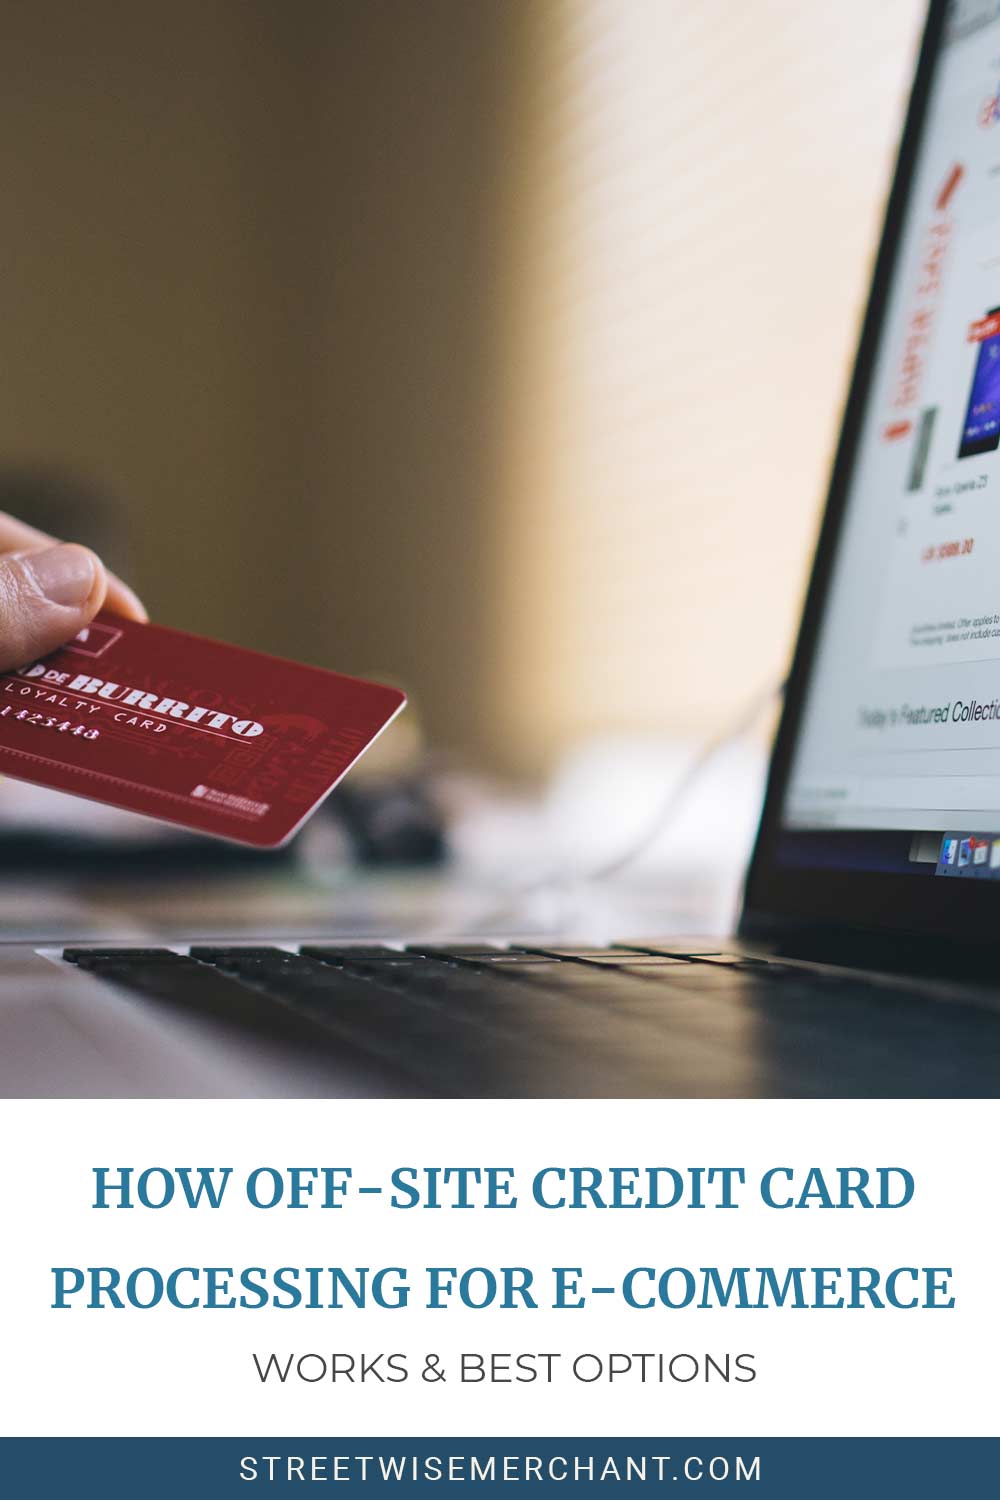 Individual holding a credit card and a laptop in front of him - How Off-Site Credit Card Processing for E-commerce Works & Best Options.